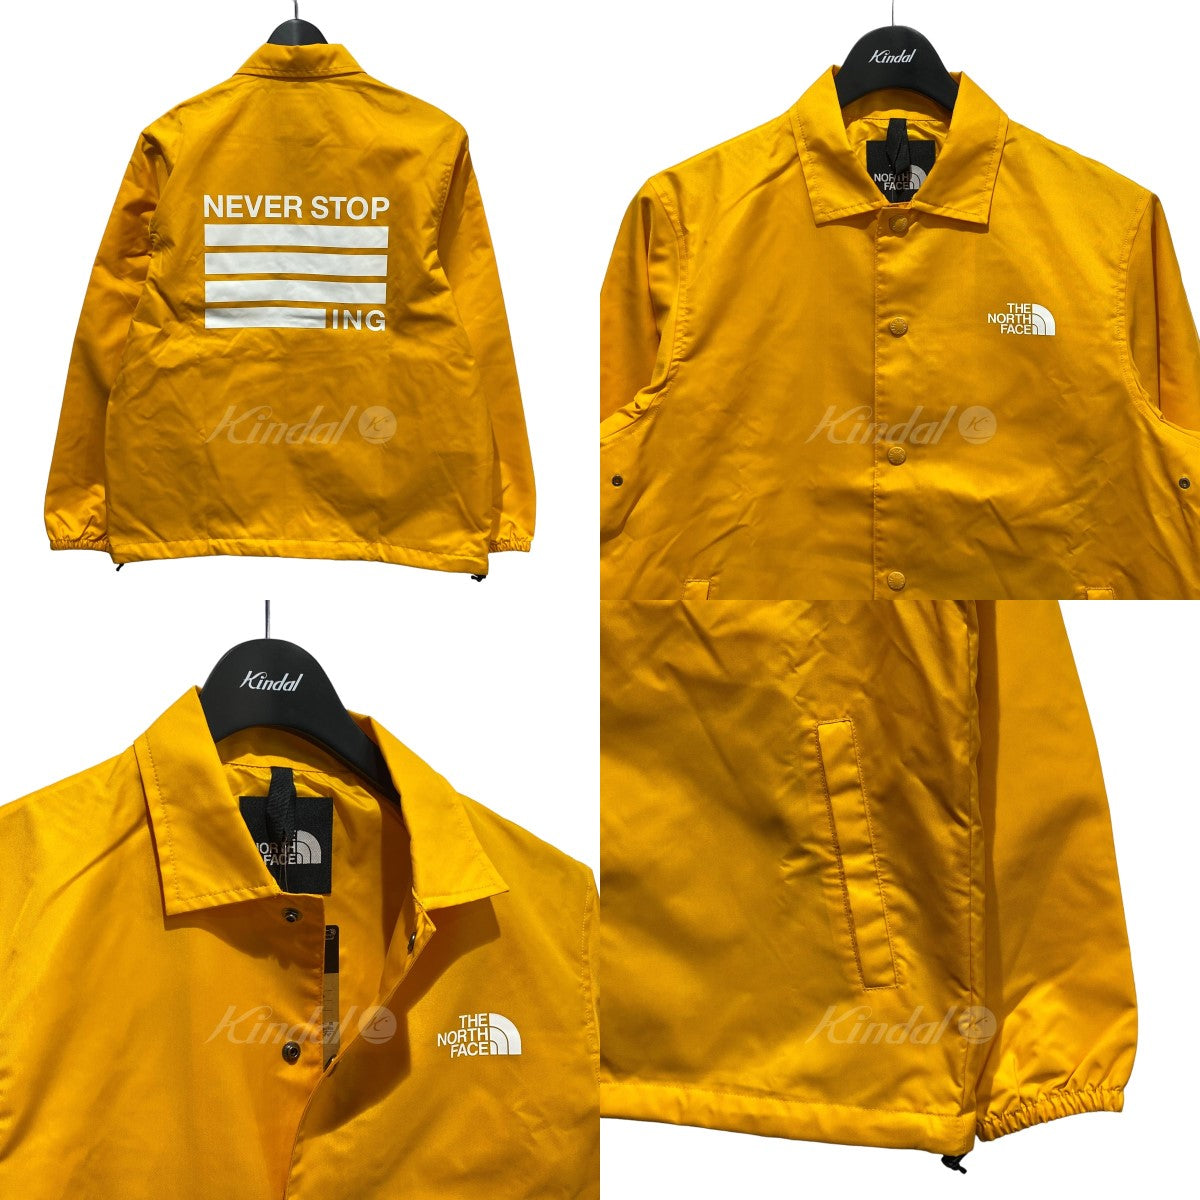 THE NORTH FACE(ザノースフェイス) NEVER STOP ING The Coach Jacket バックプリント コーチジャケット